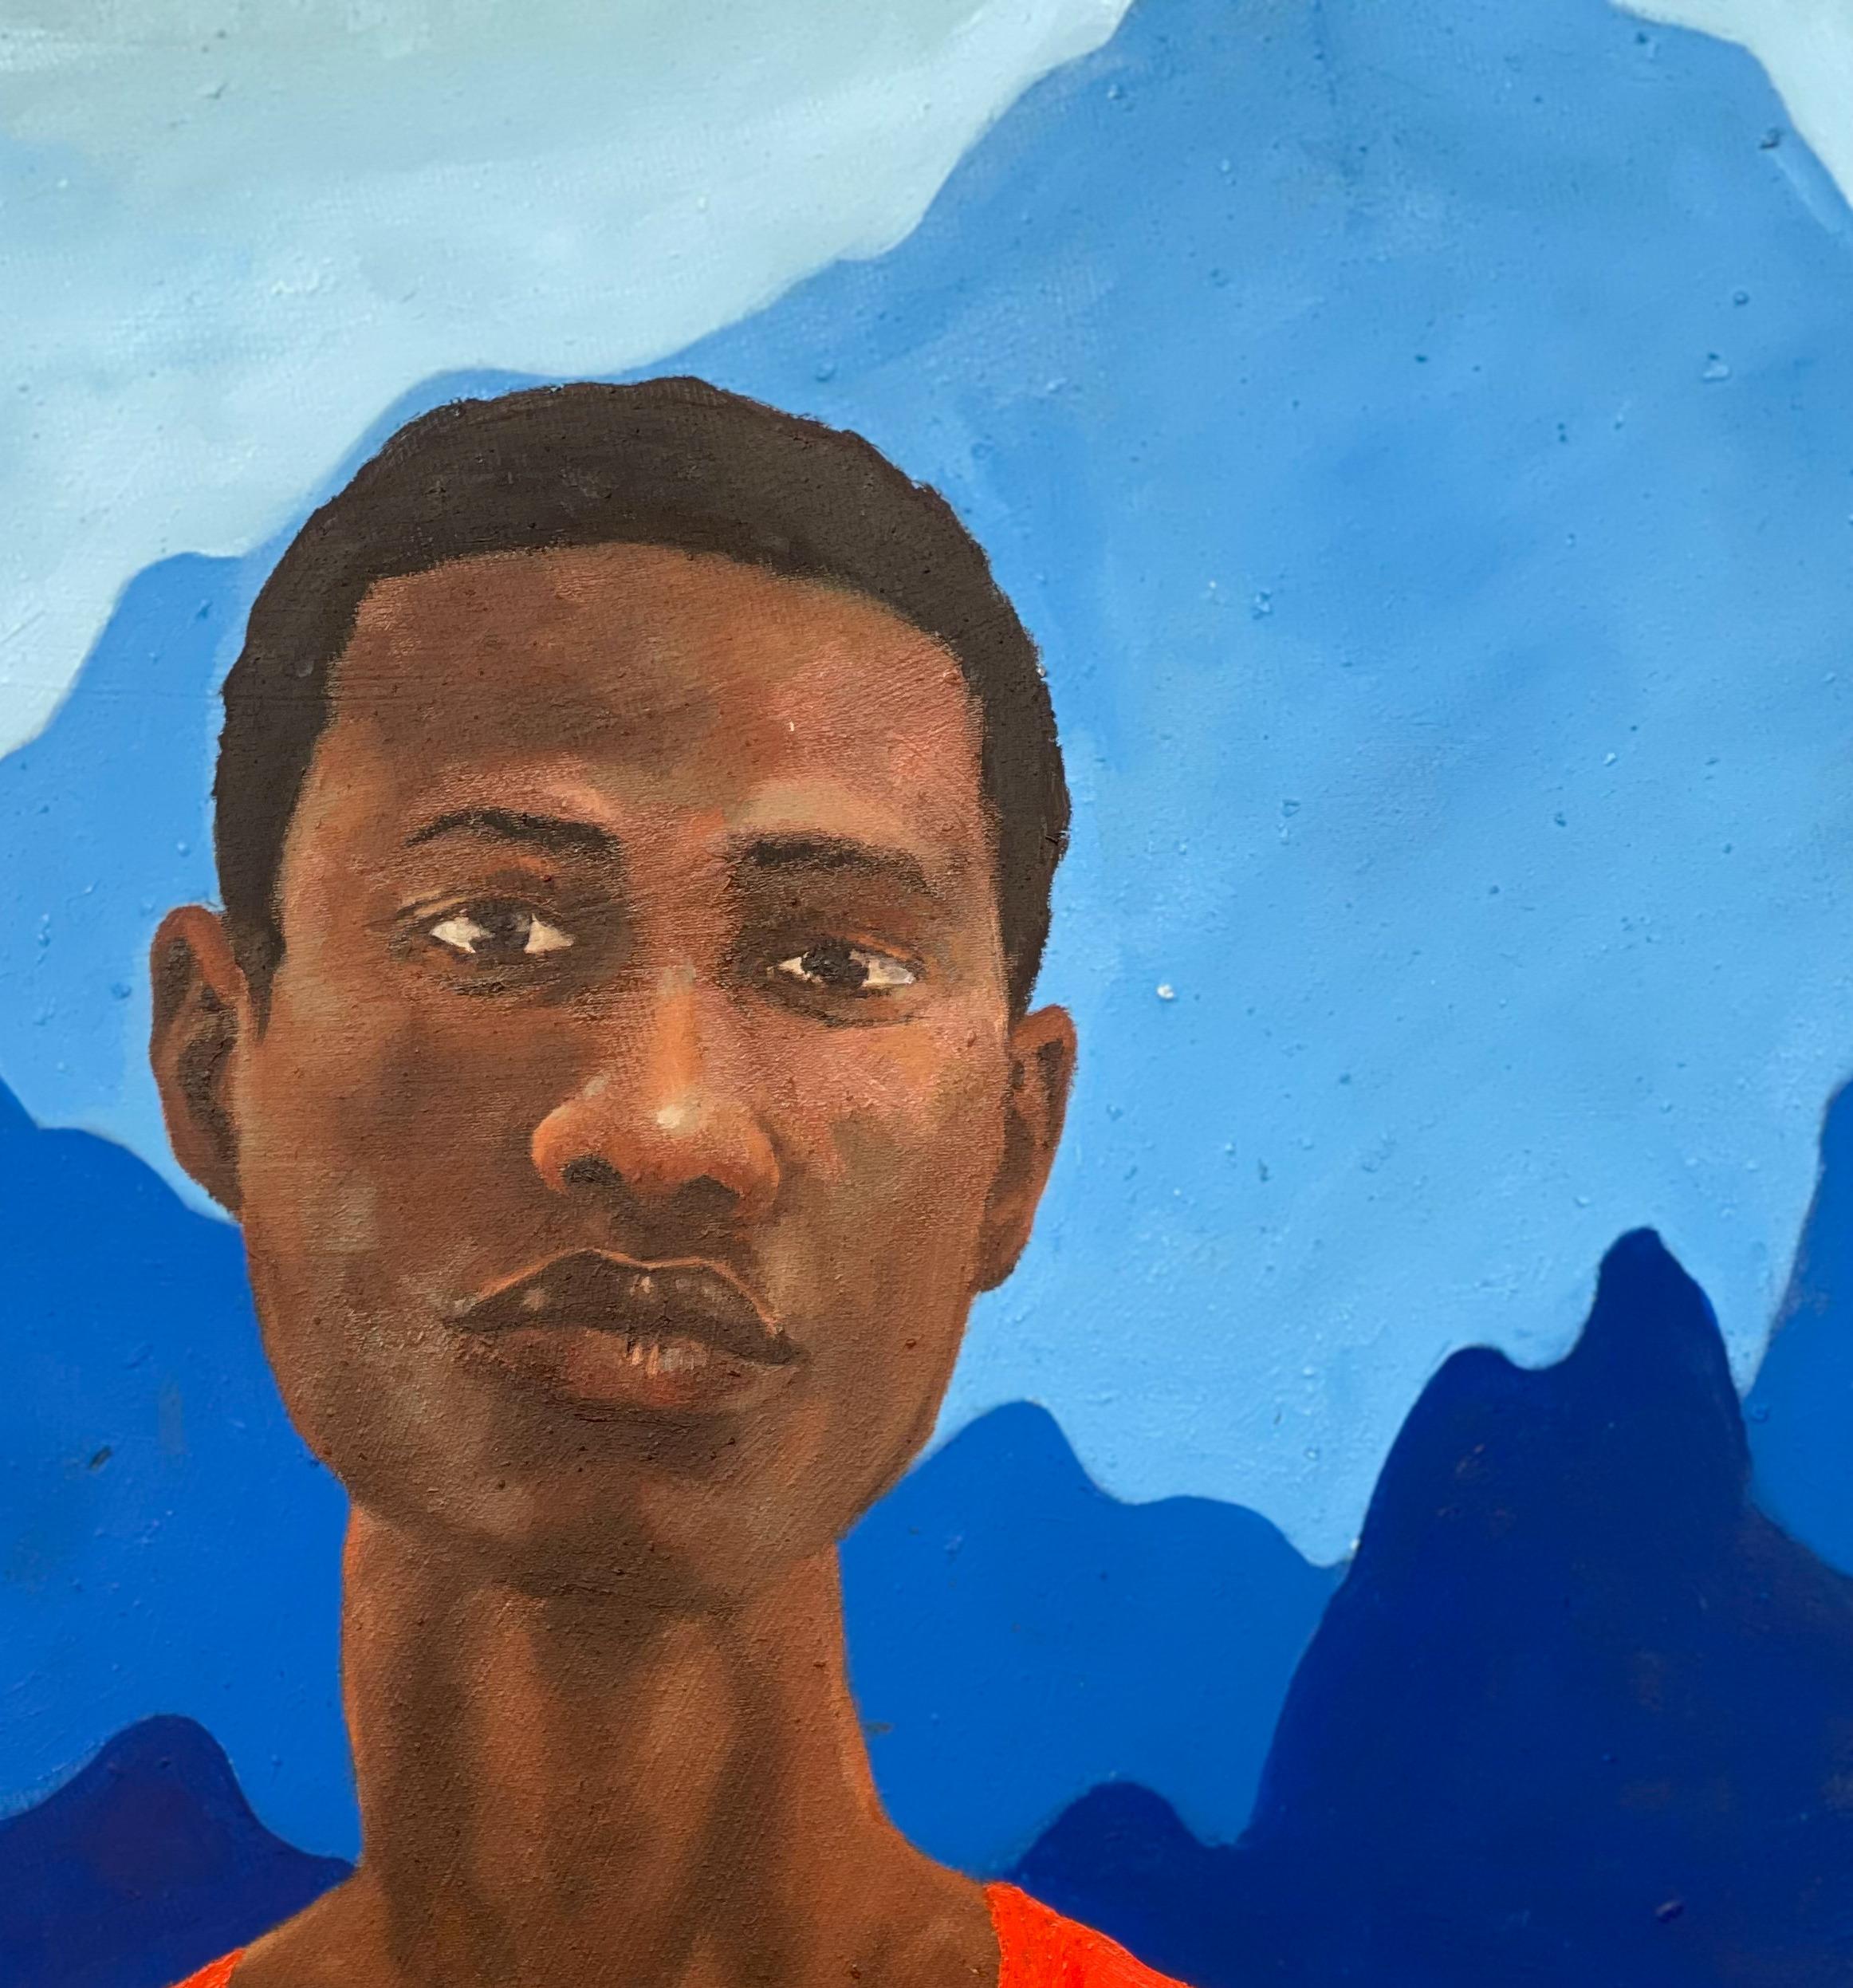 African Boy I - Expressionist Painting by Faith Gbadero